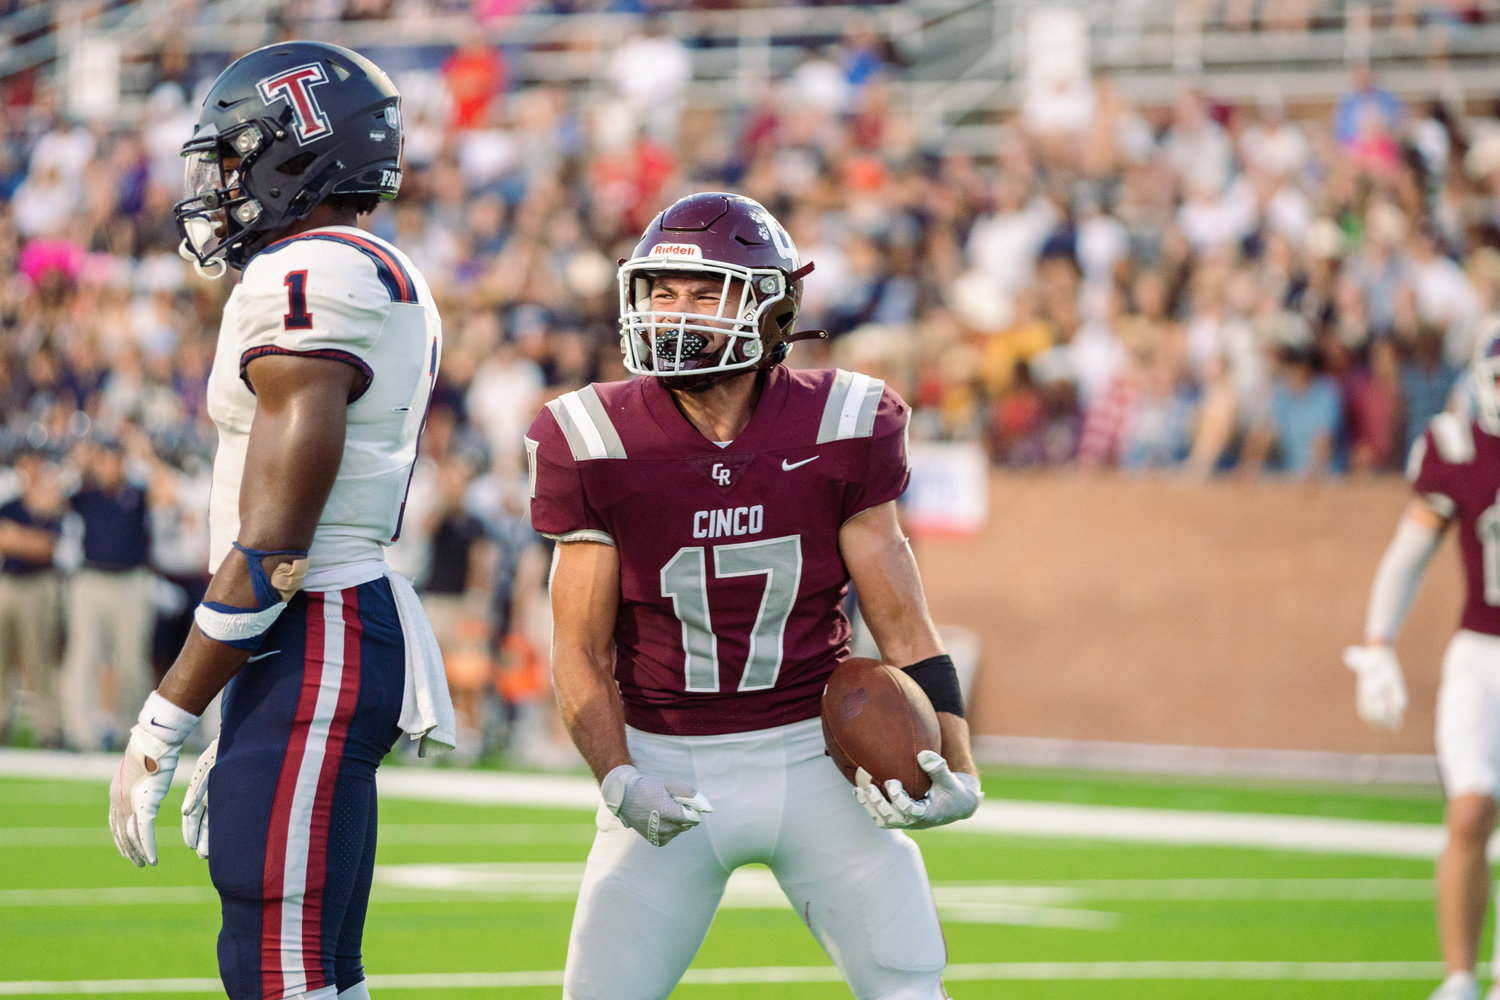 Cinco Ranch’s Eric Eckstrom celebrates after a play during Friday’s game between Cinco Ranch and Tompkins at Rhodes Stadium.